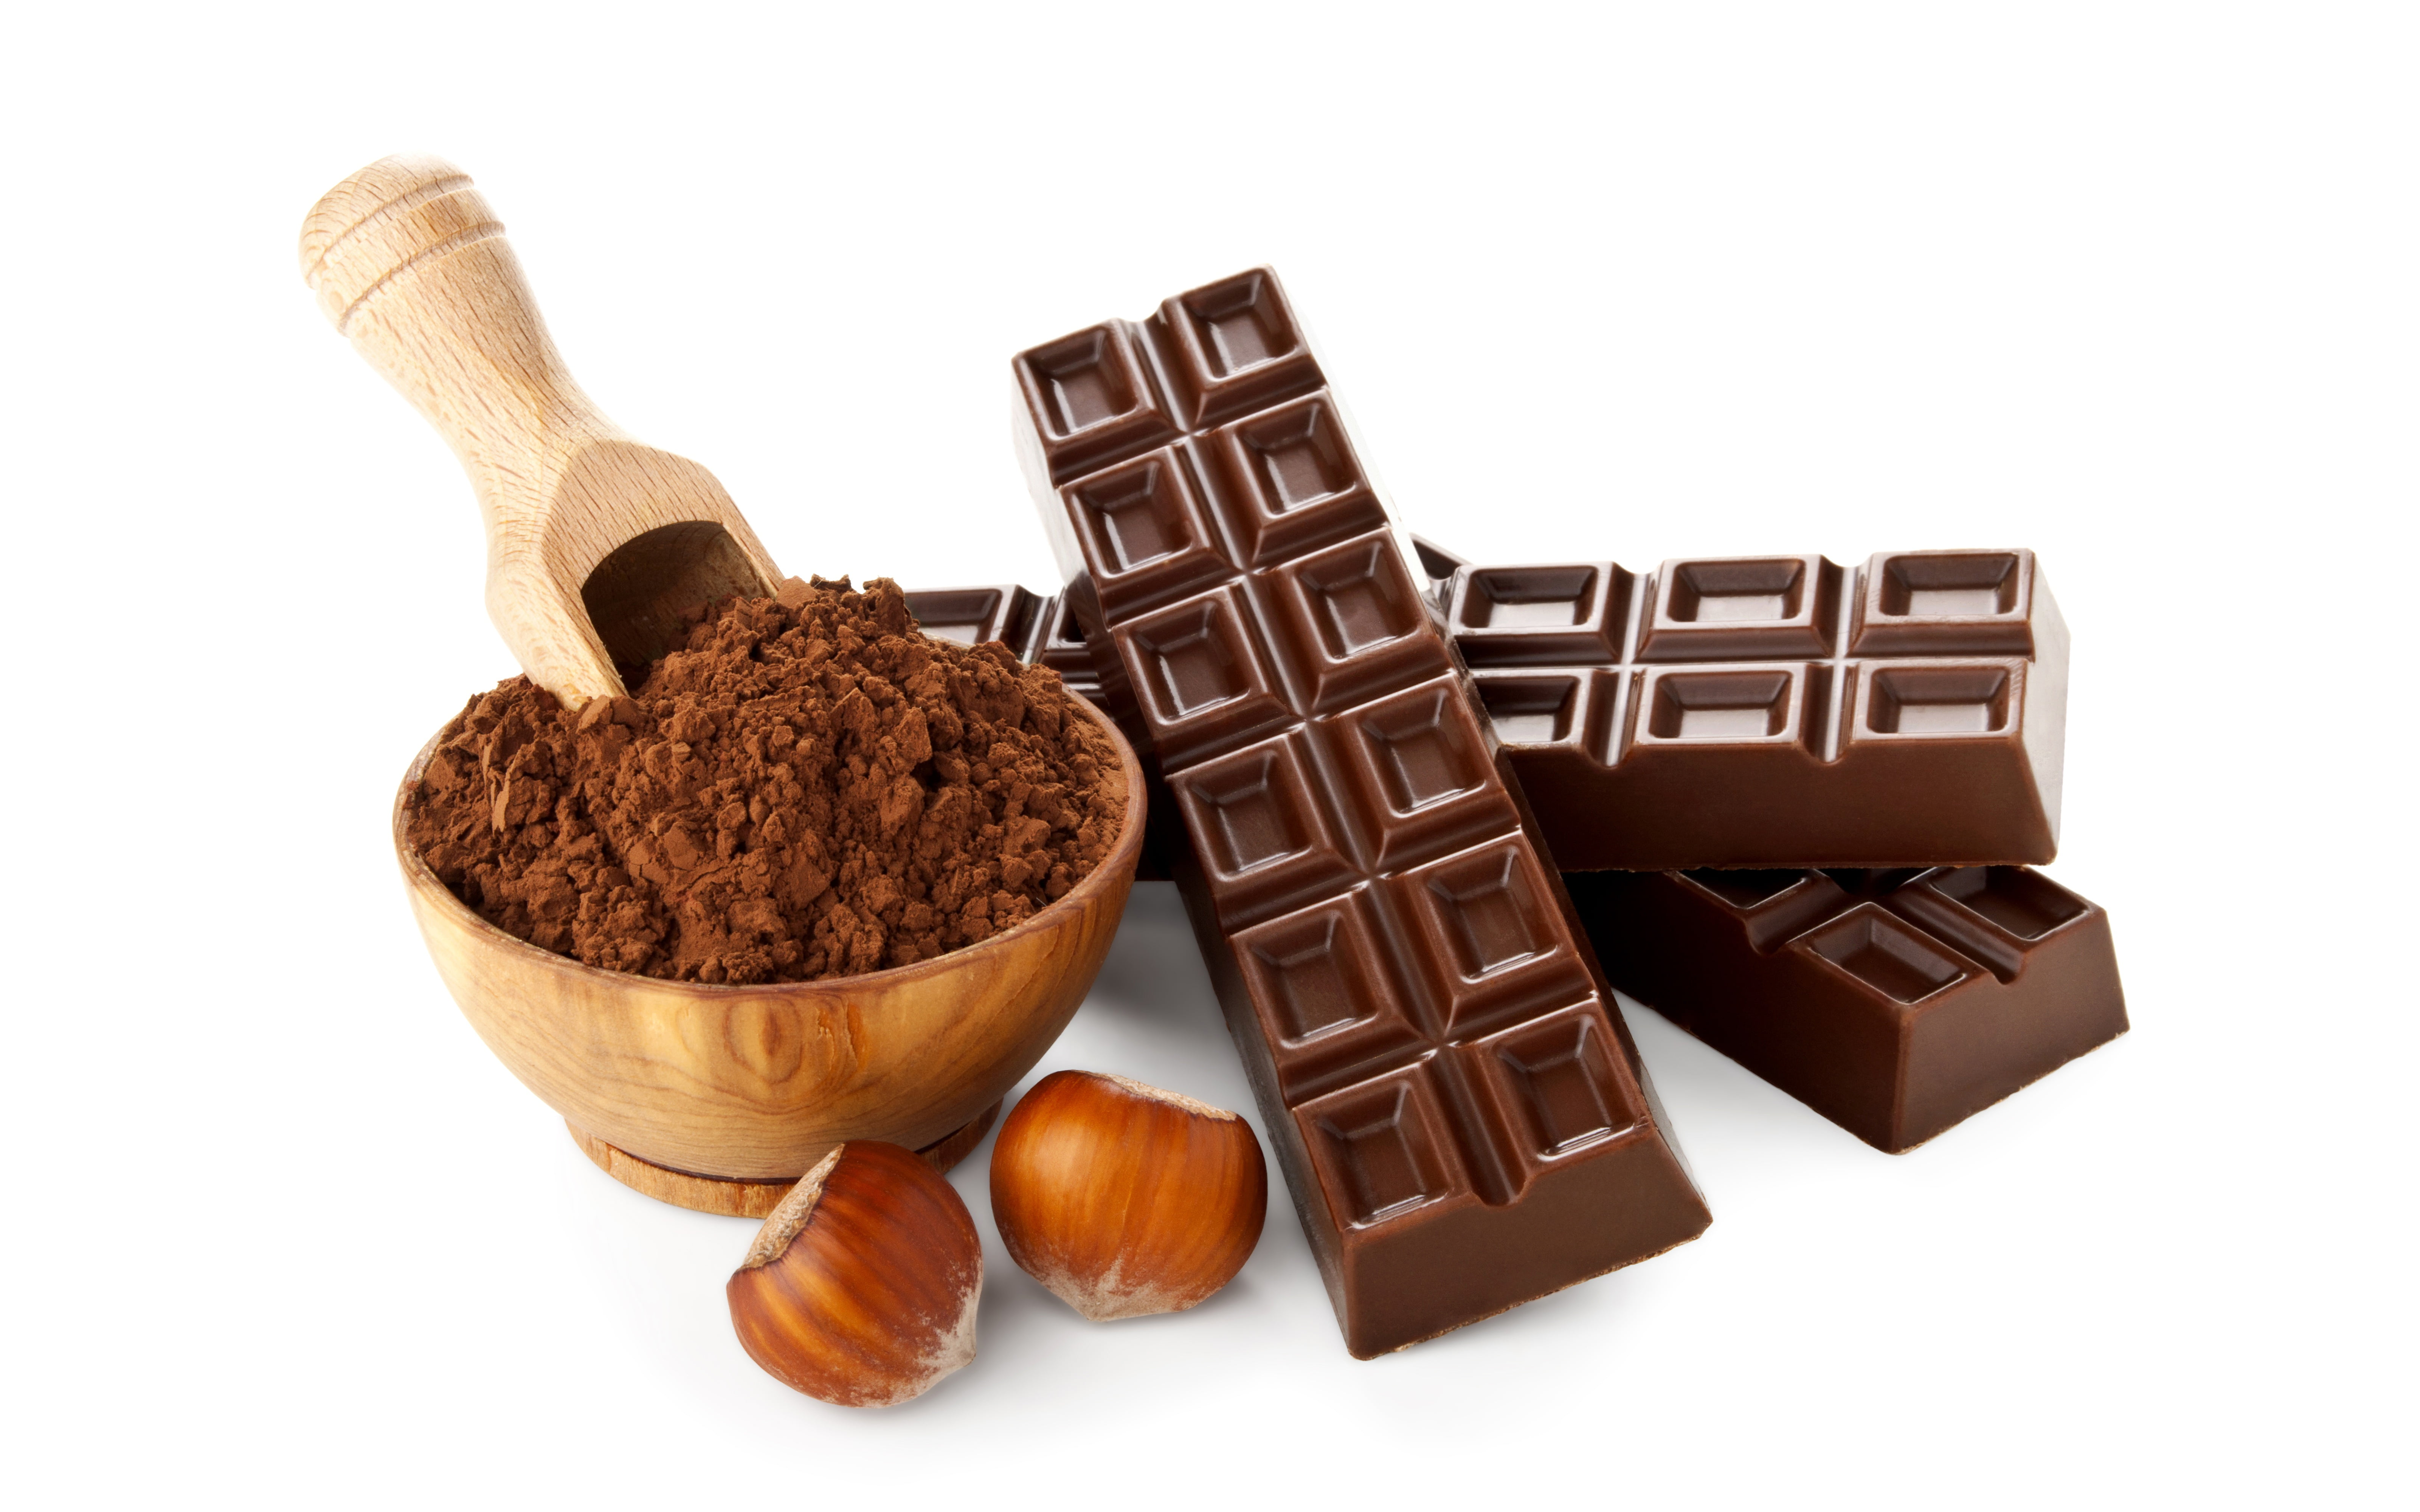 chocolate, Cup, white background, nuts, hazelnuts, cocoa, bar